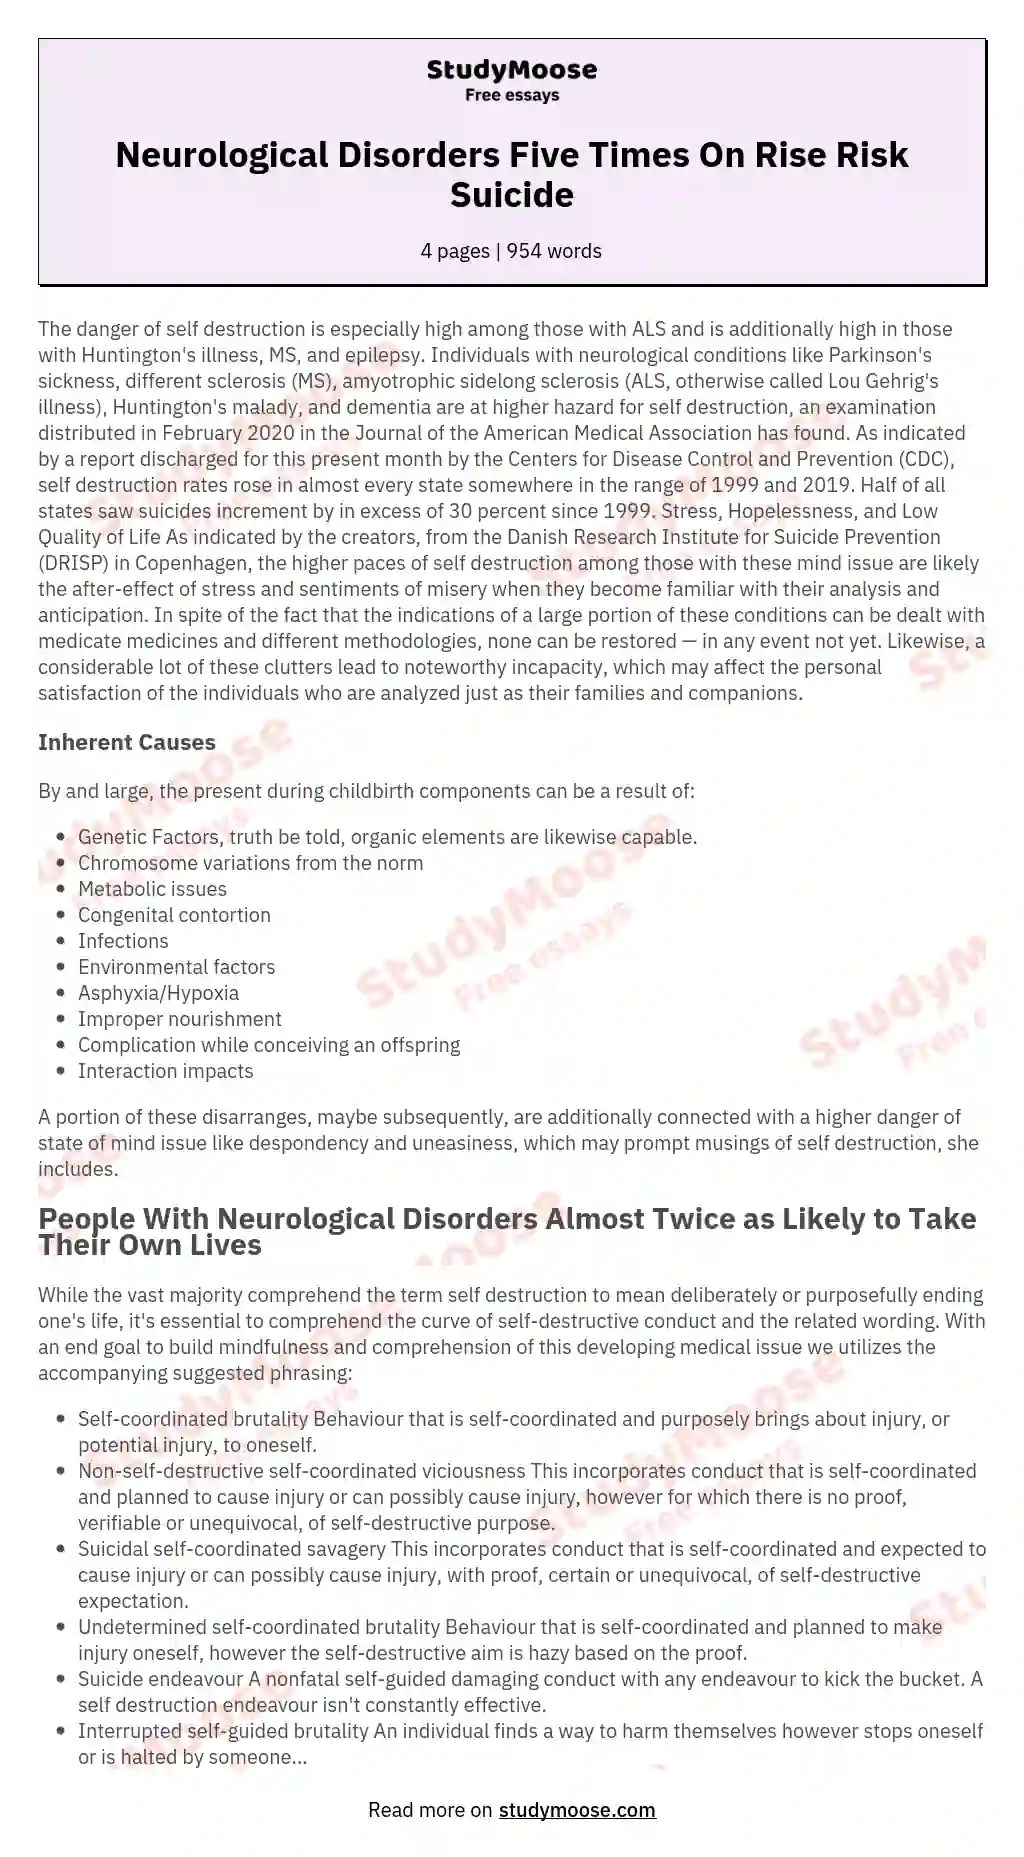 Neurological Disorders Five Times On Rise Risk Suicide essay